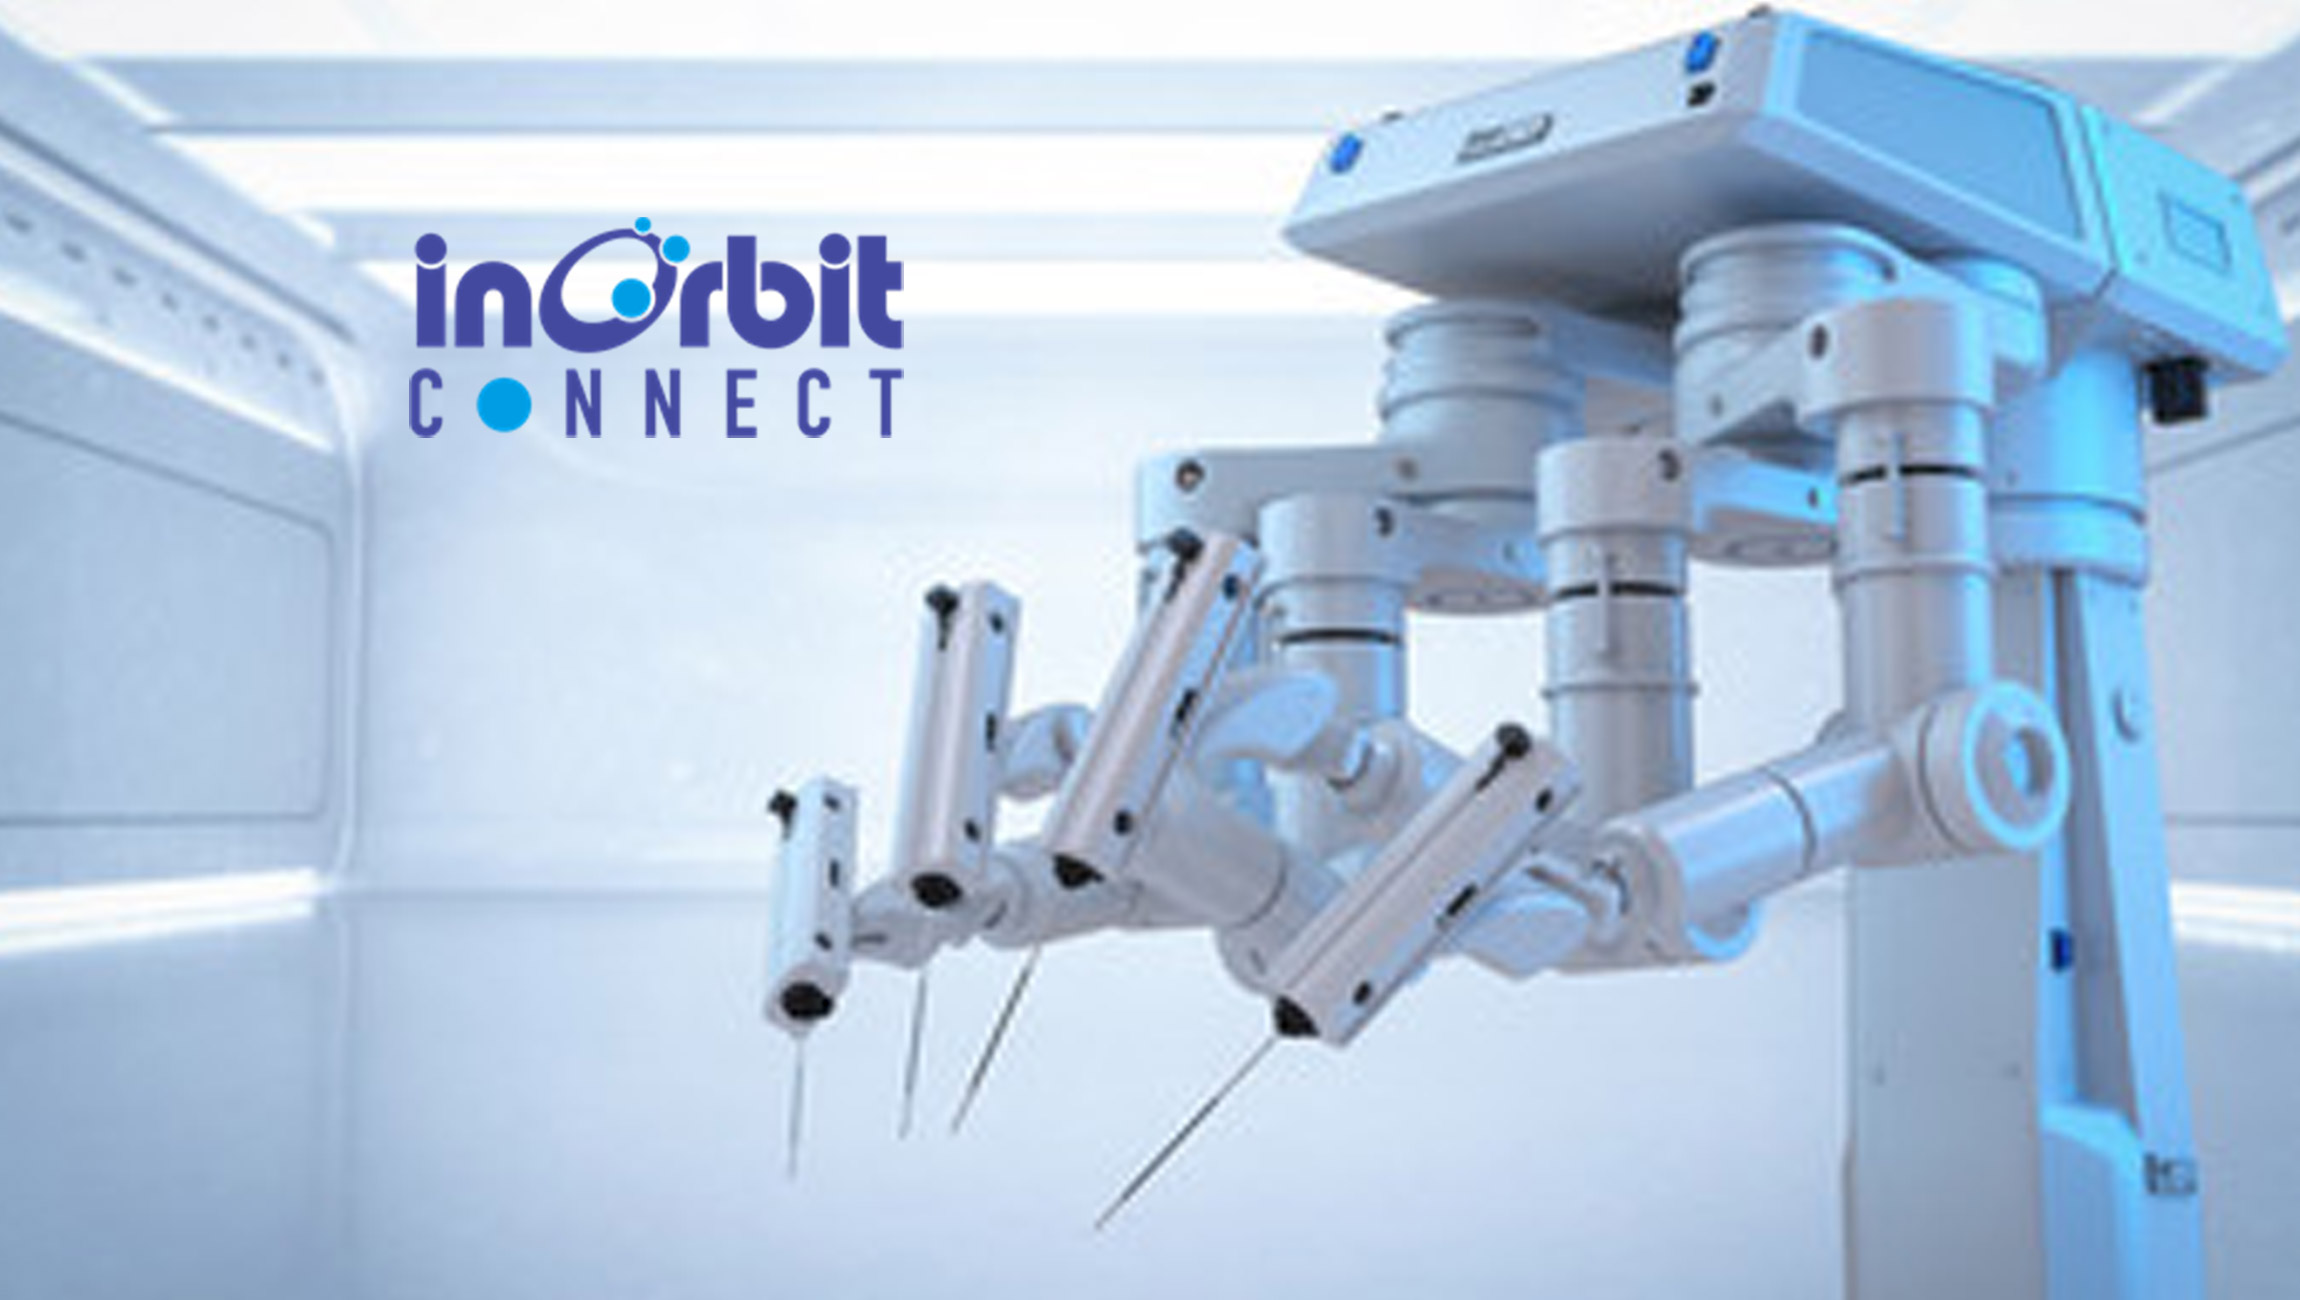 InOrbit Connect Certification Simplifies Scaling Robot Operations